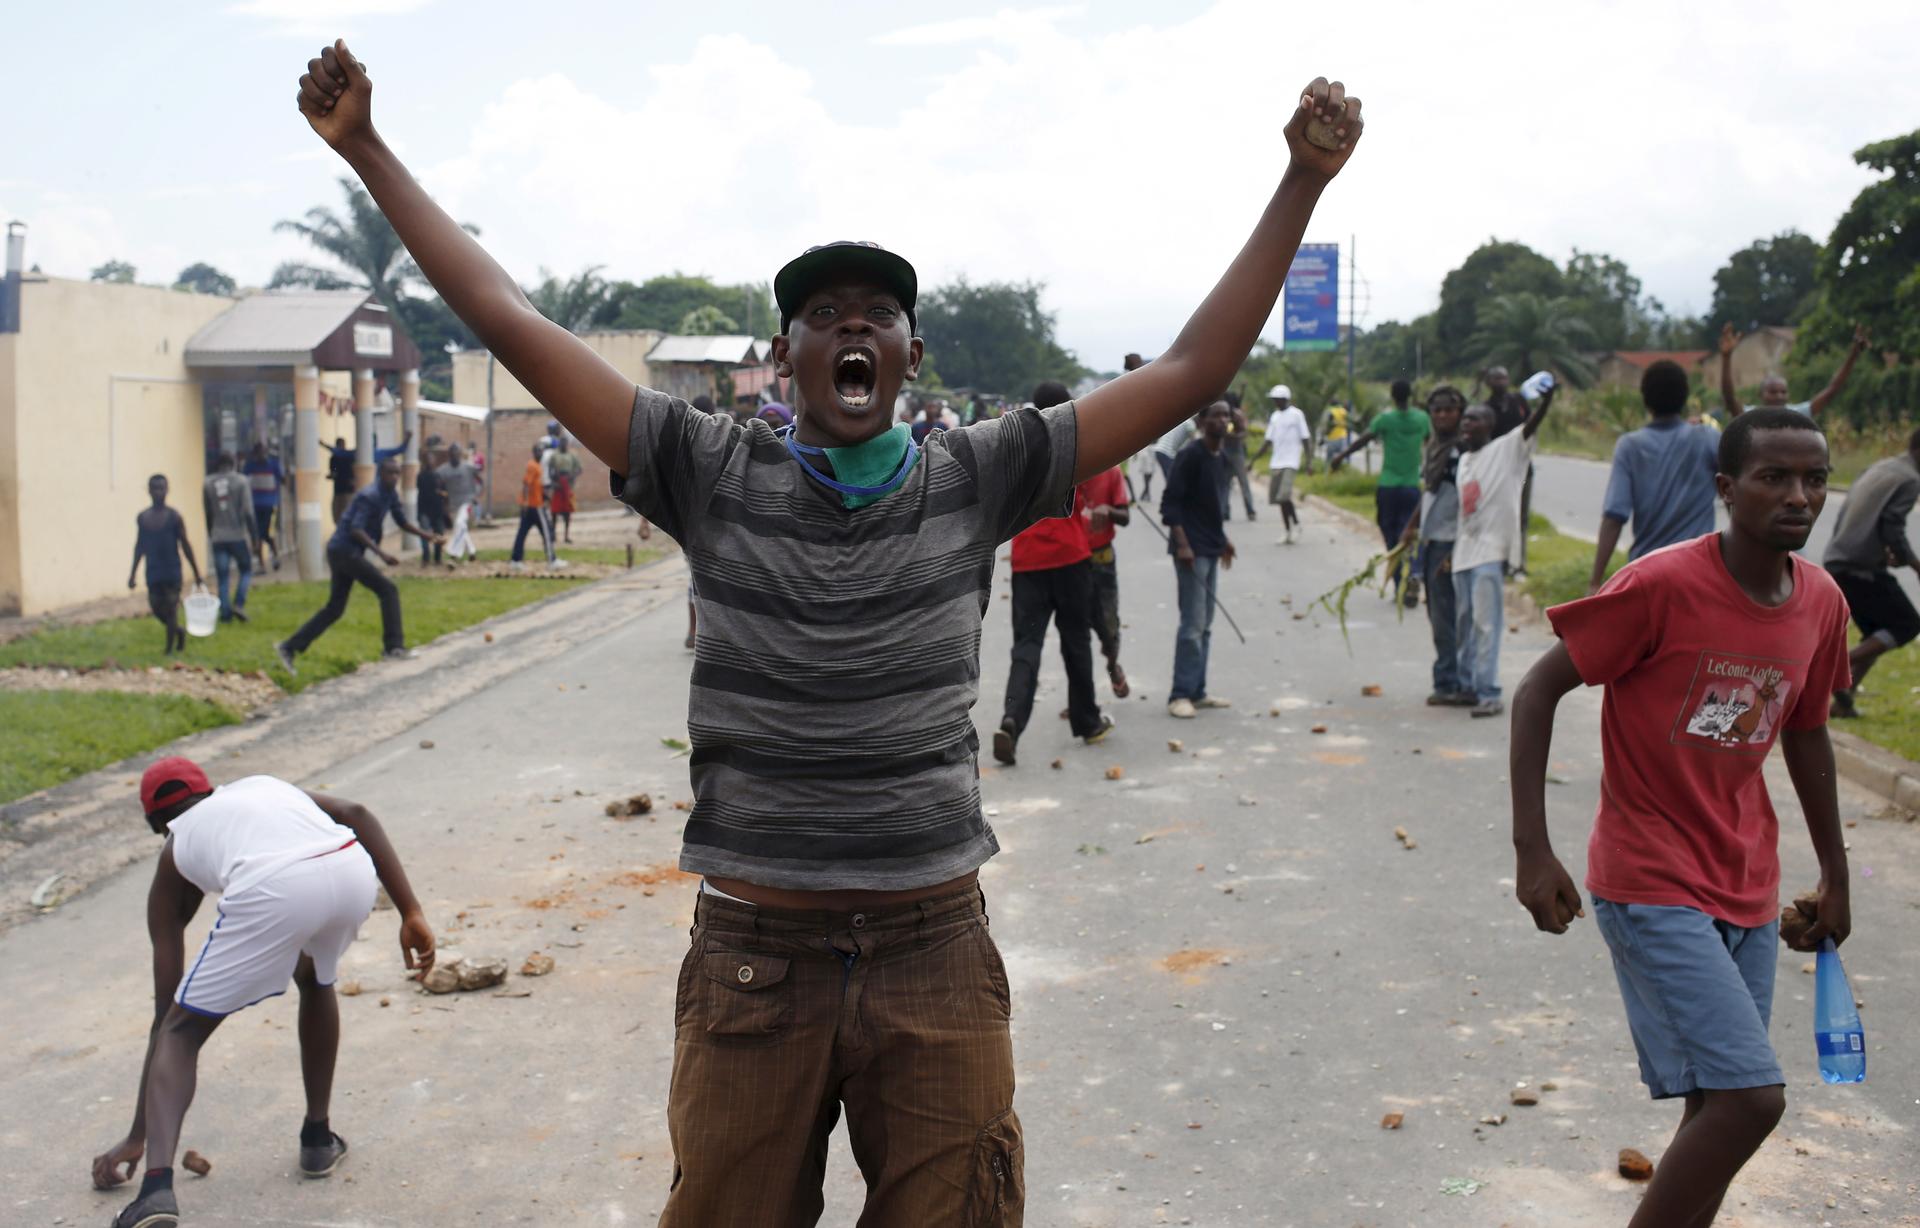 A man gestures during a protest in Bujumbura, Burundi, on May 13, 2015 against Burundian President Pierre Nkurunziza's decision to run for a third term.